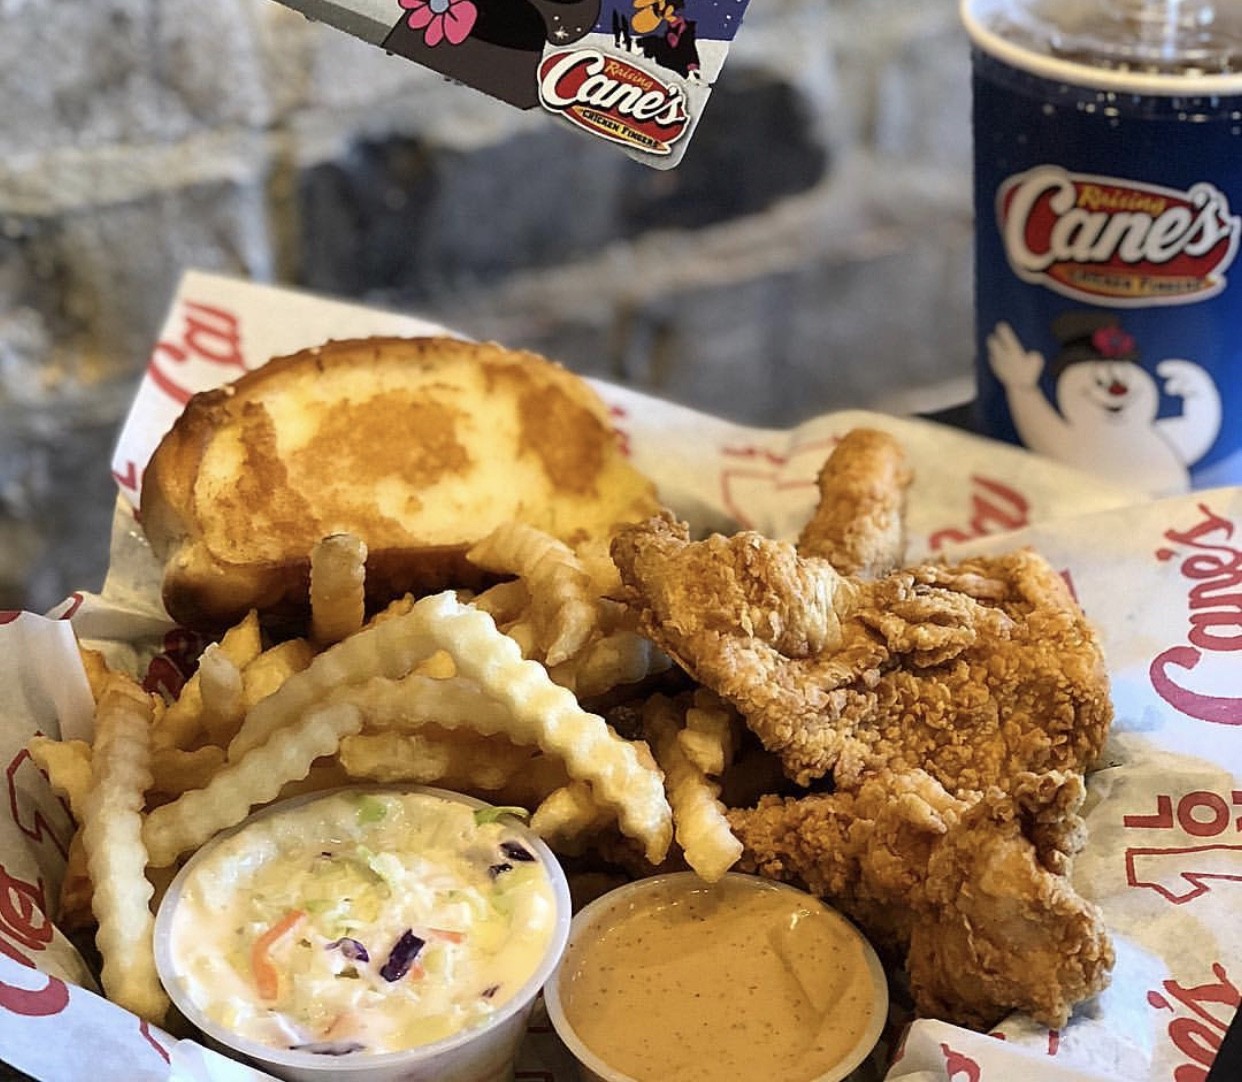 A basket of Raising Cane's fried chicken, french fries and a soda.